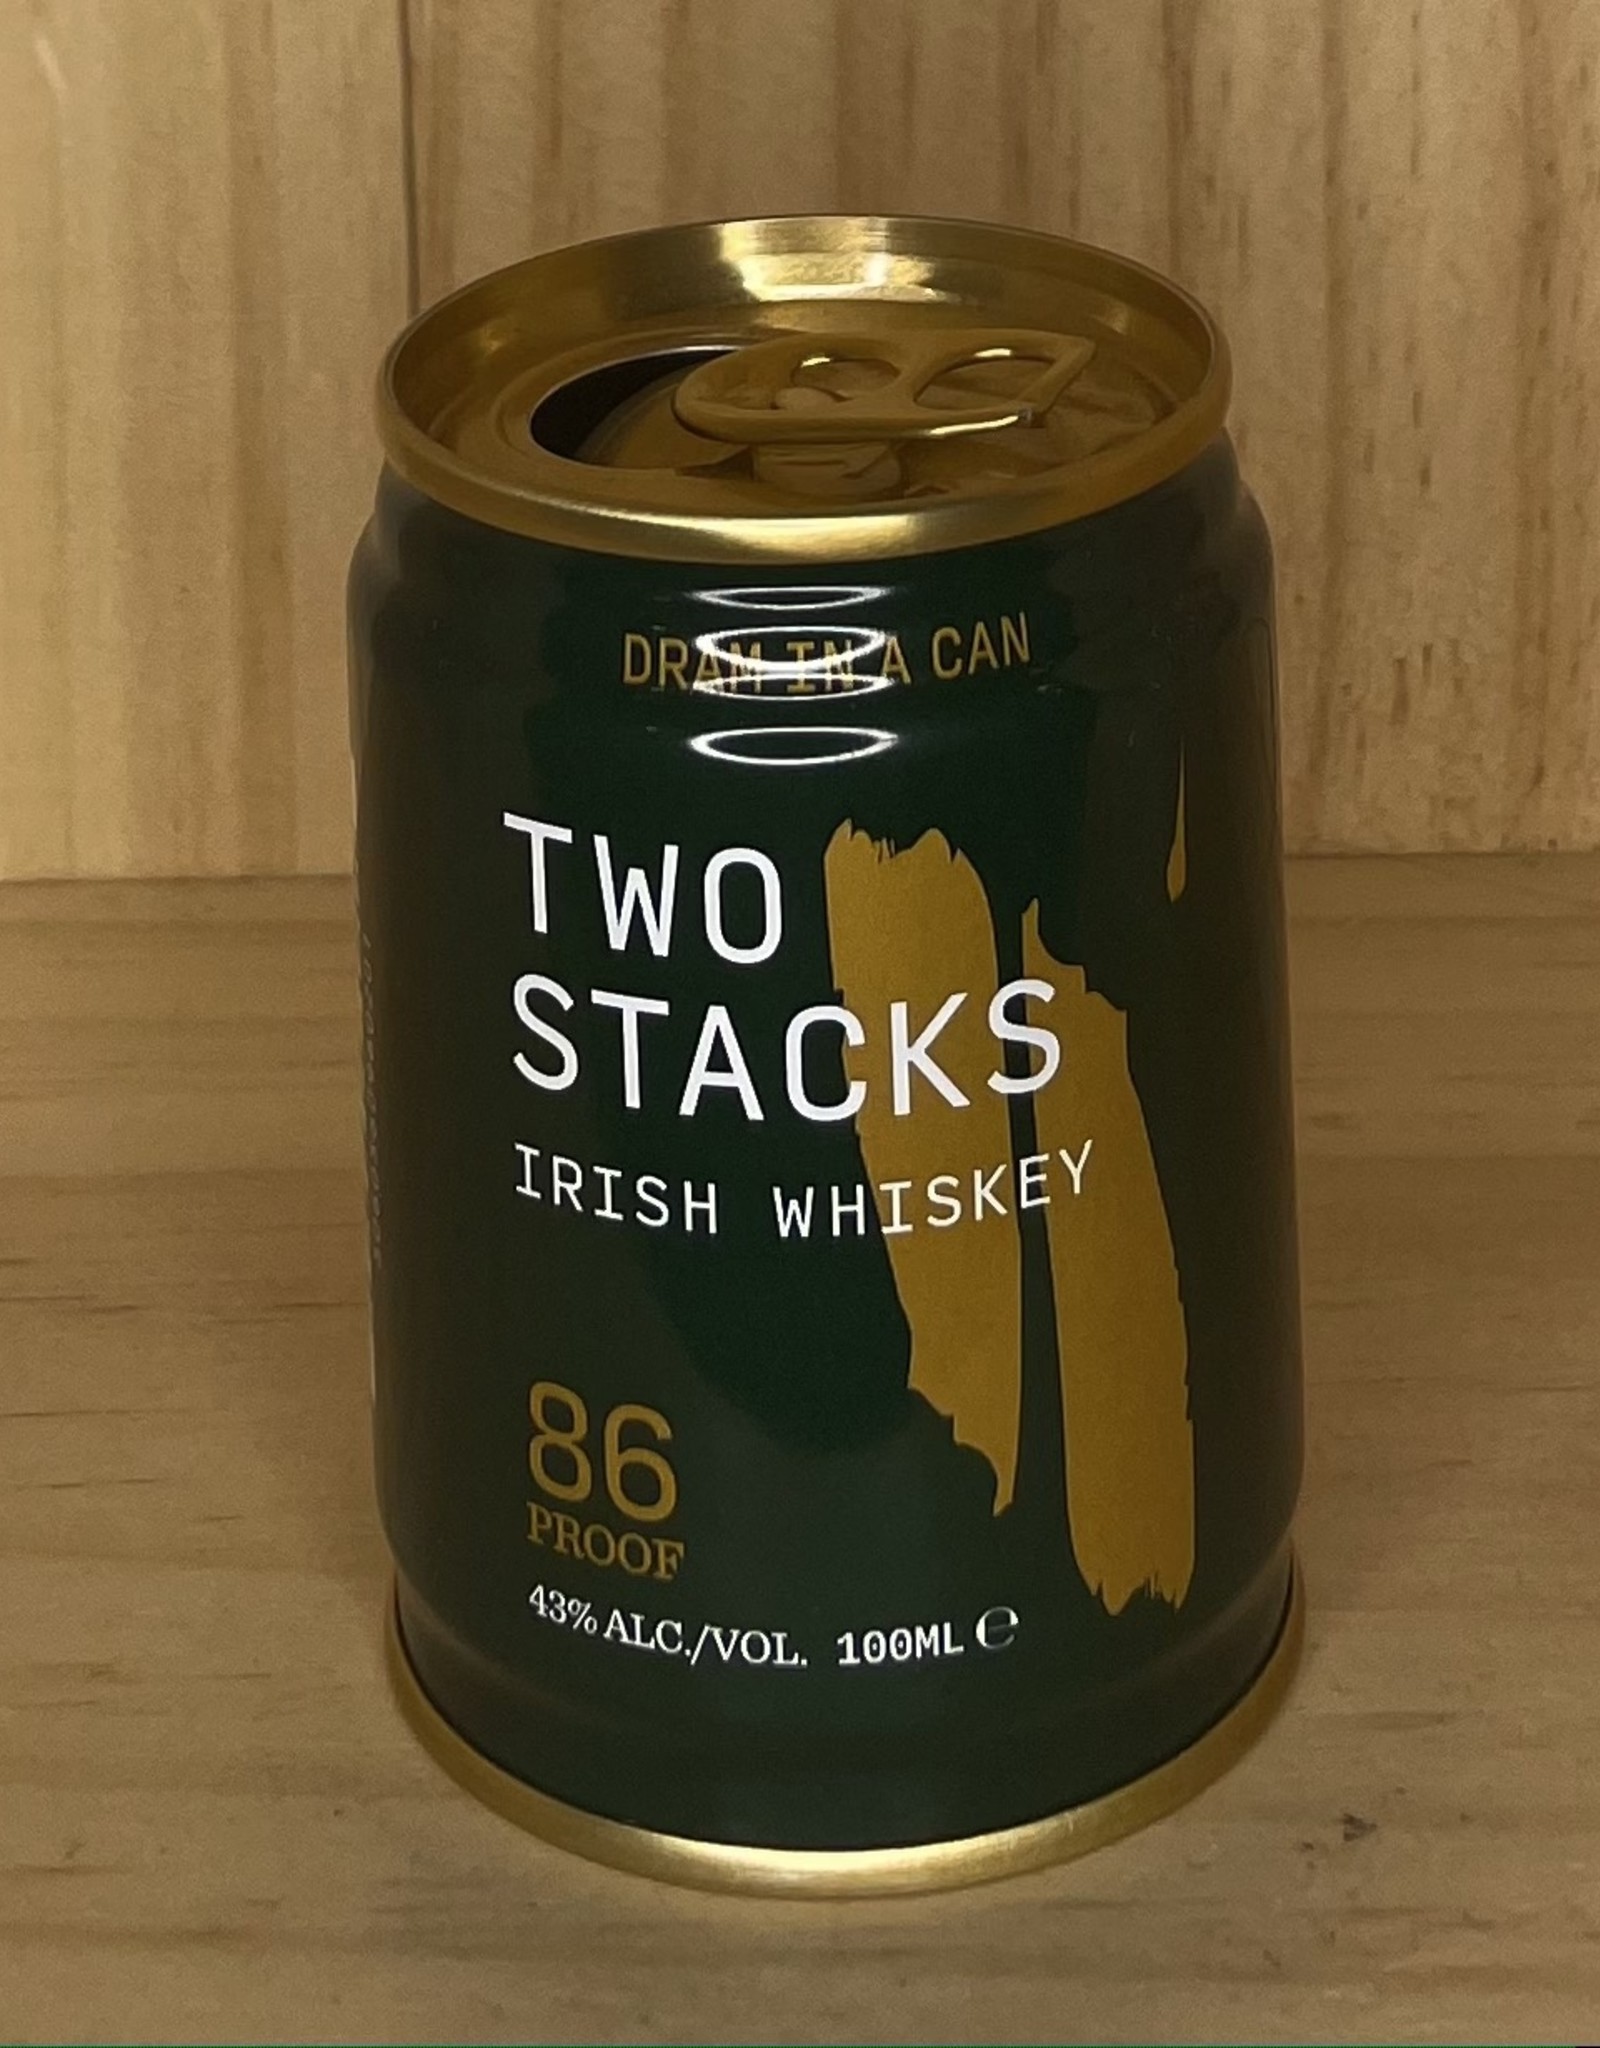 Two Stacks, Dram in a can Irish Whiskey 100ml